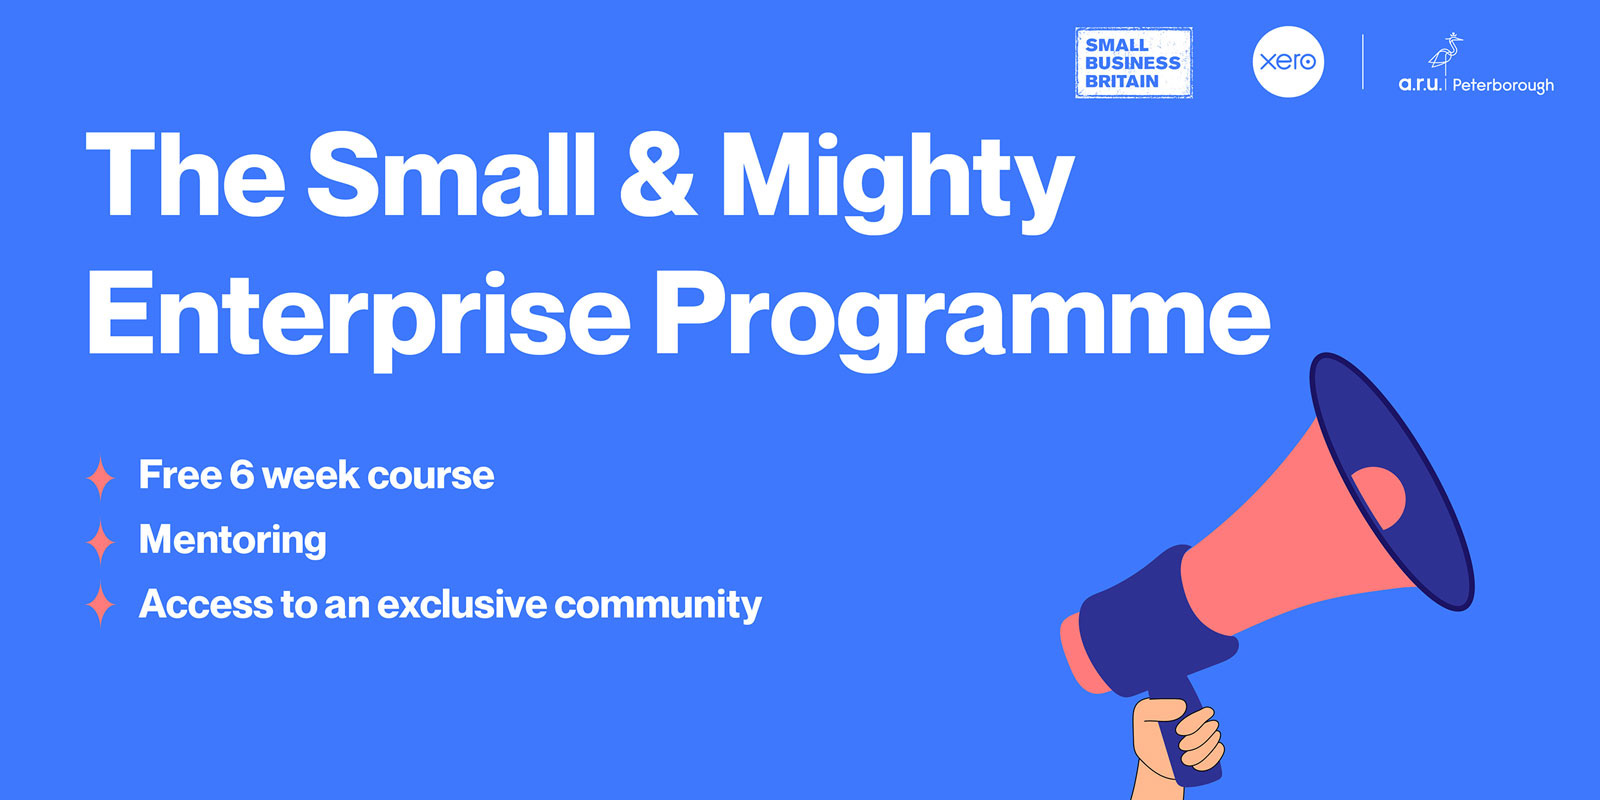 Small & Mighty Programme